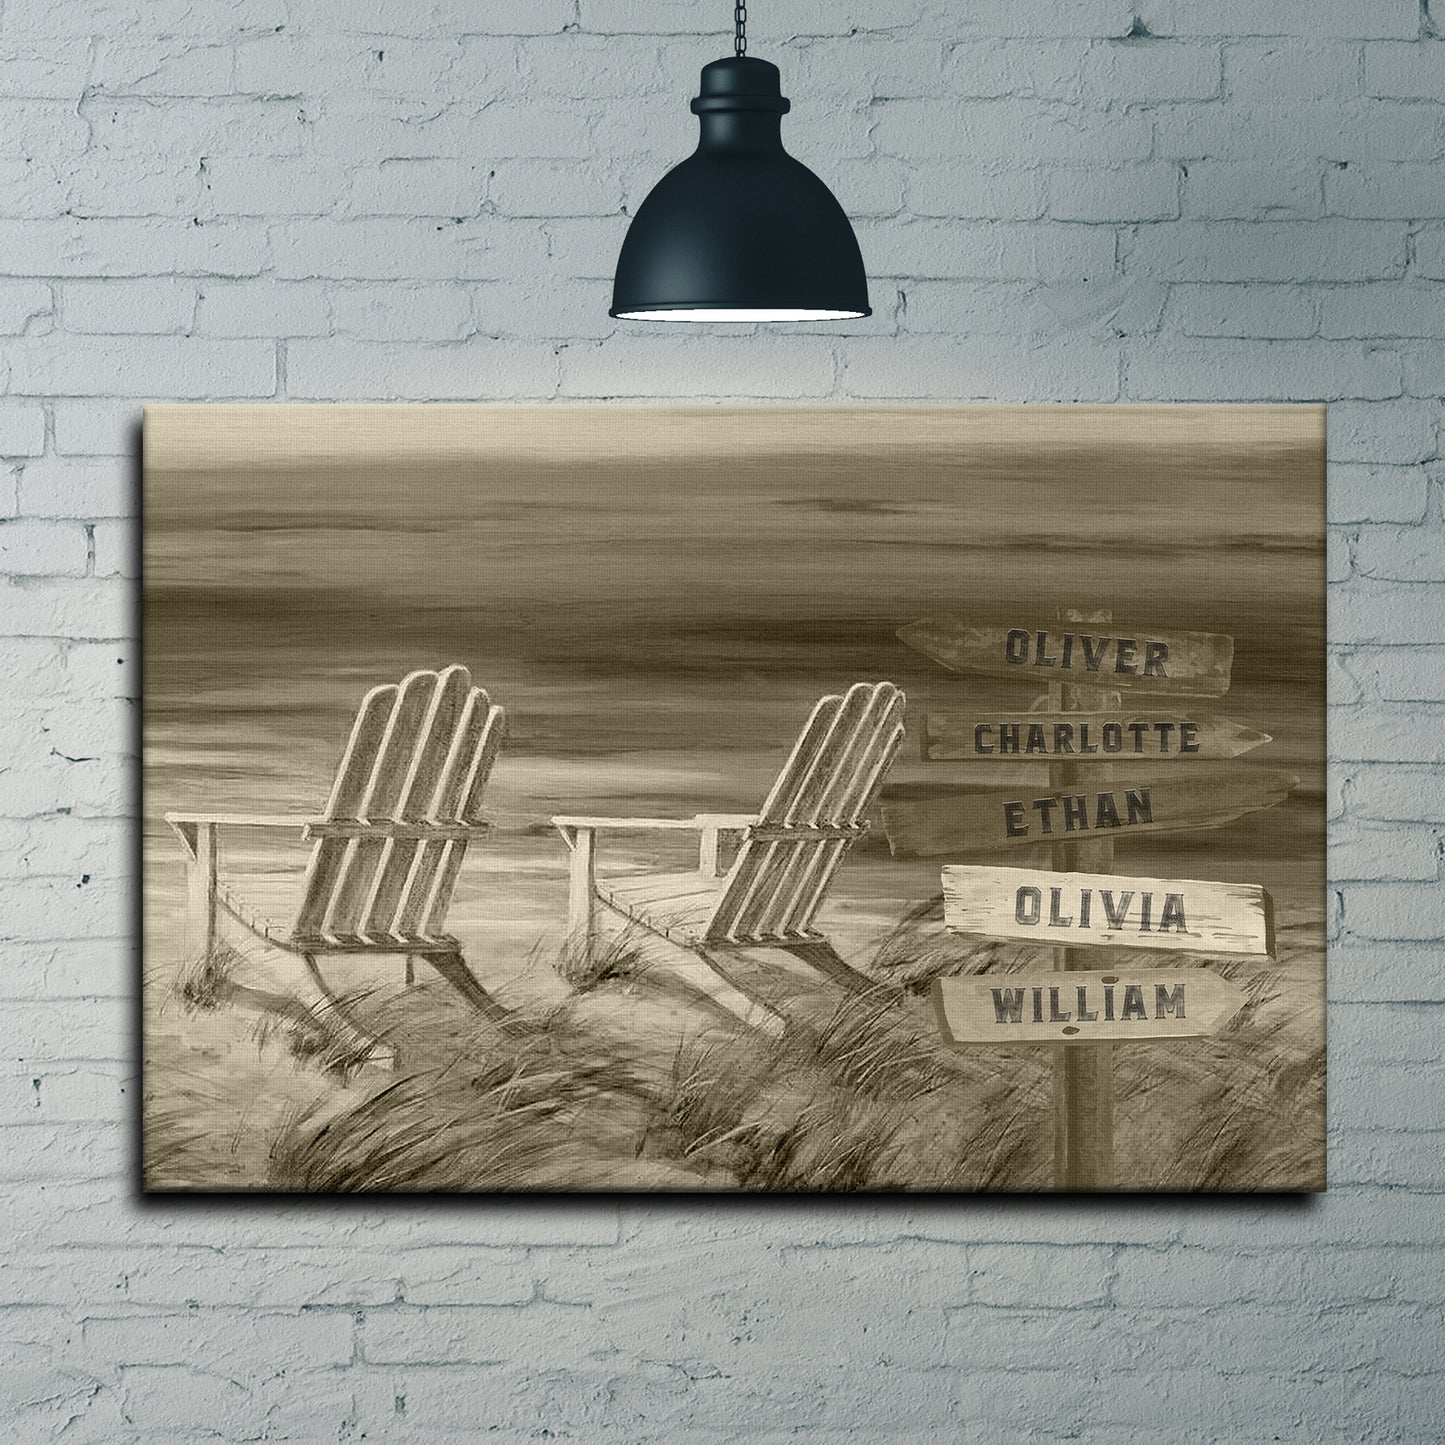 Monochrome Beach Name Sign - Image by Tailored Canvases